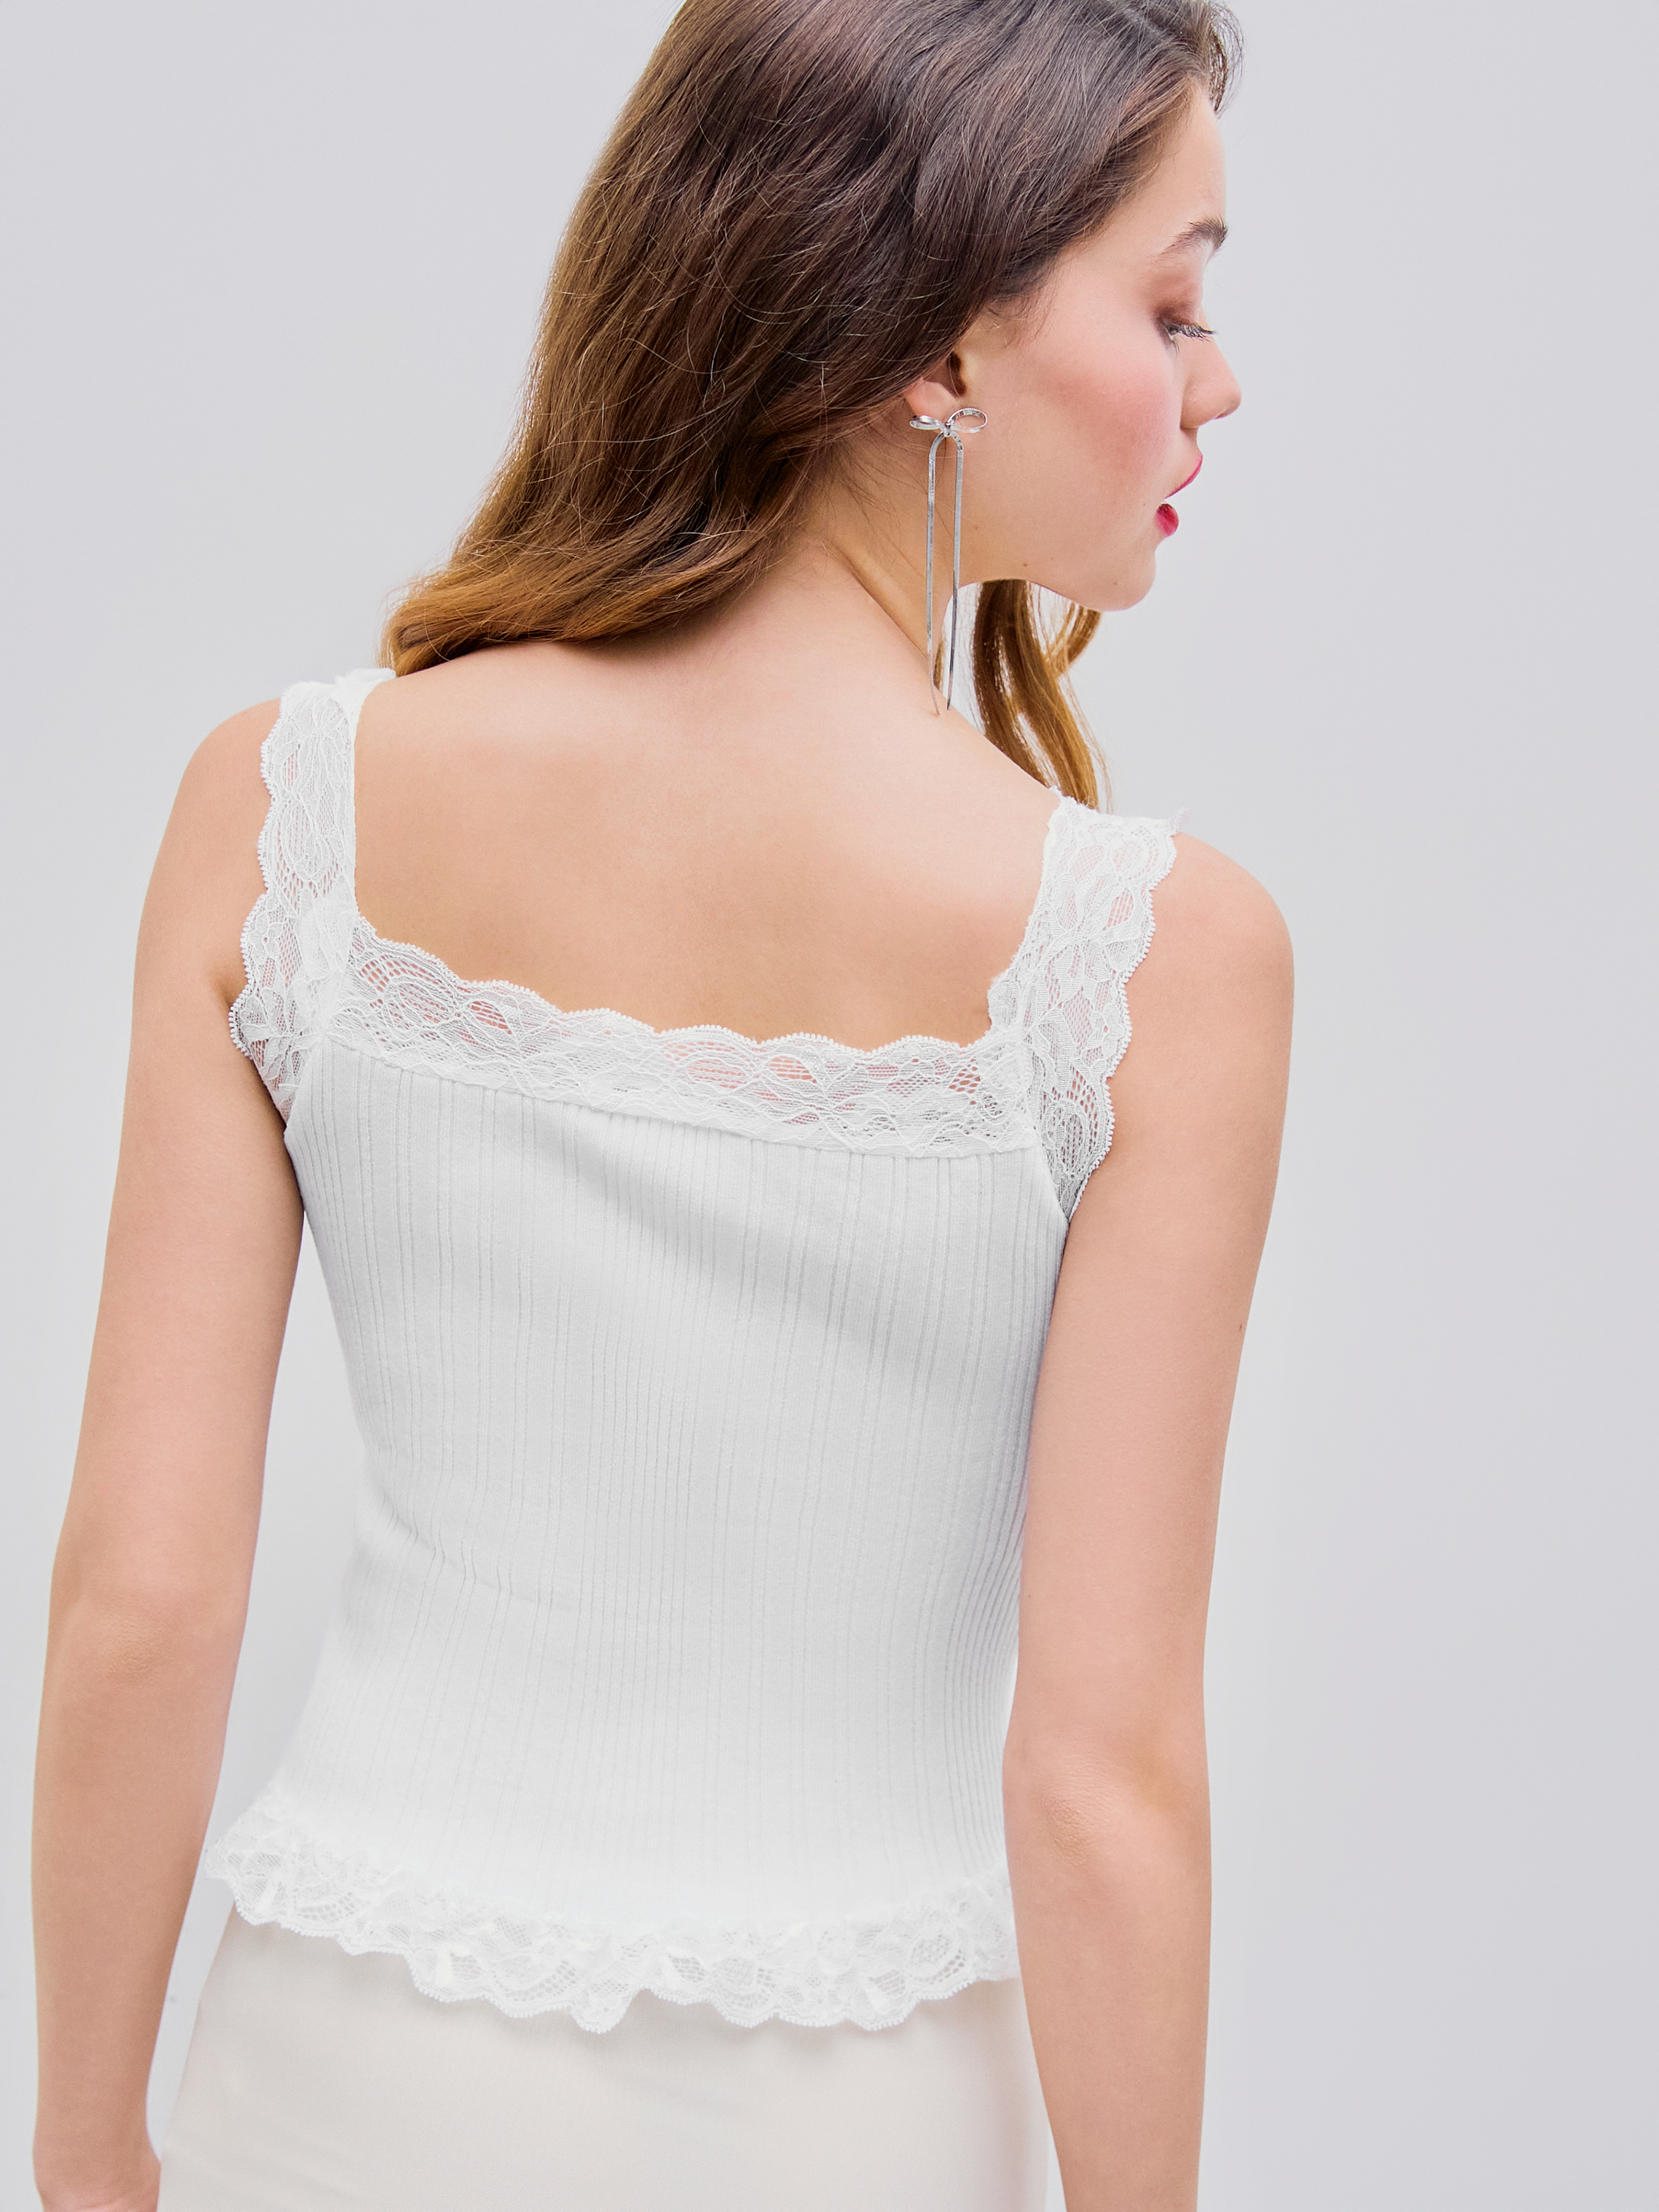 Ruffle Lace Tank Top - Cider